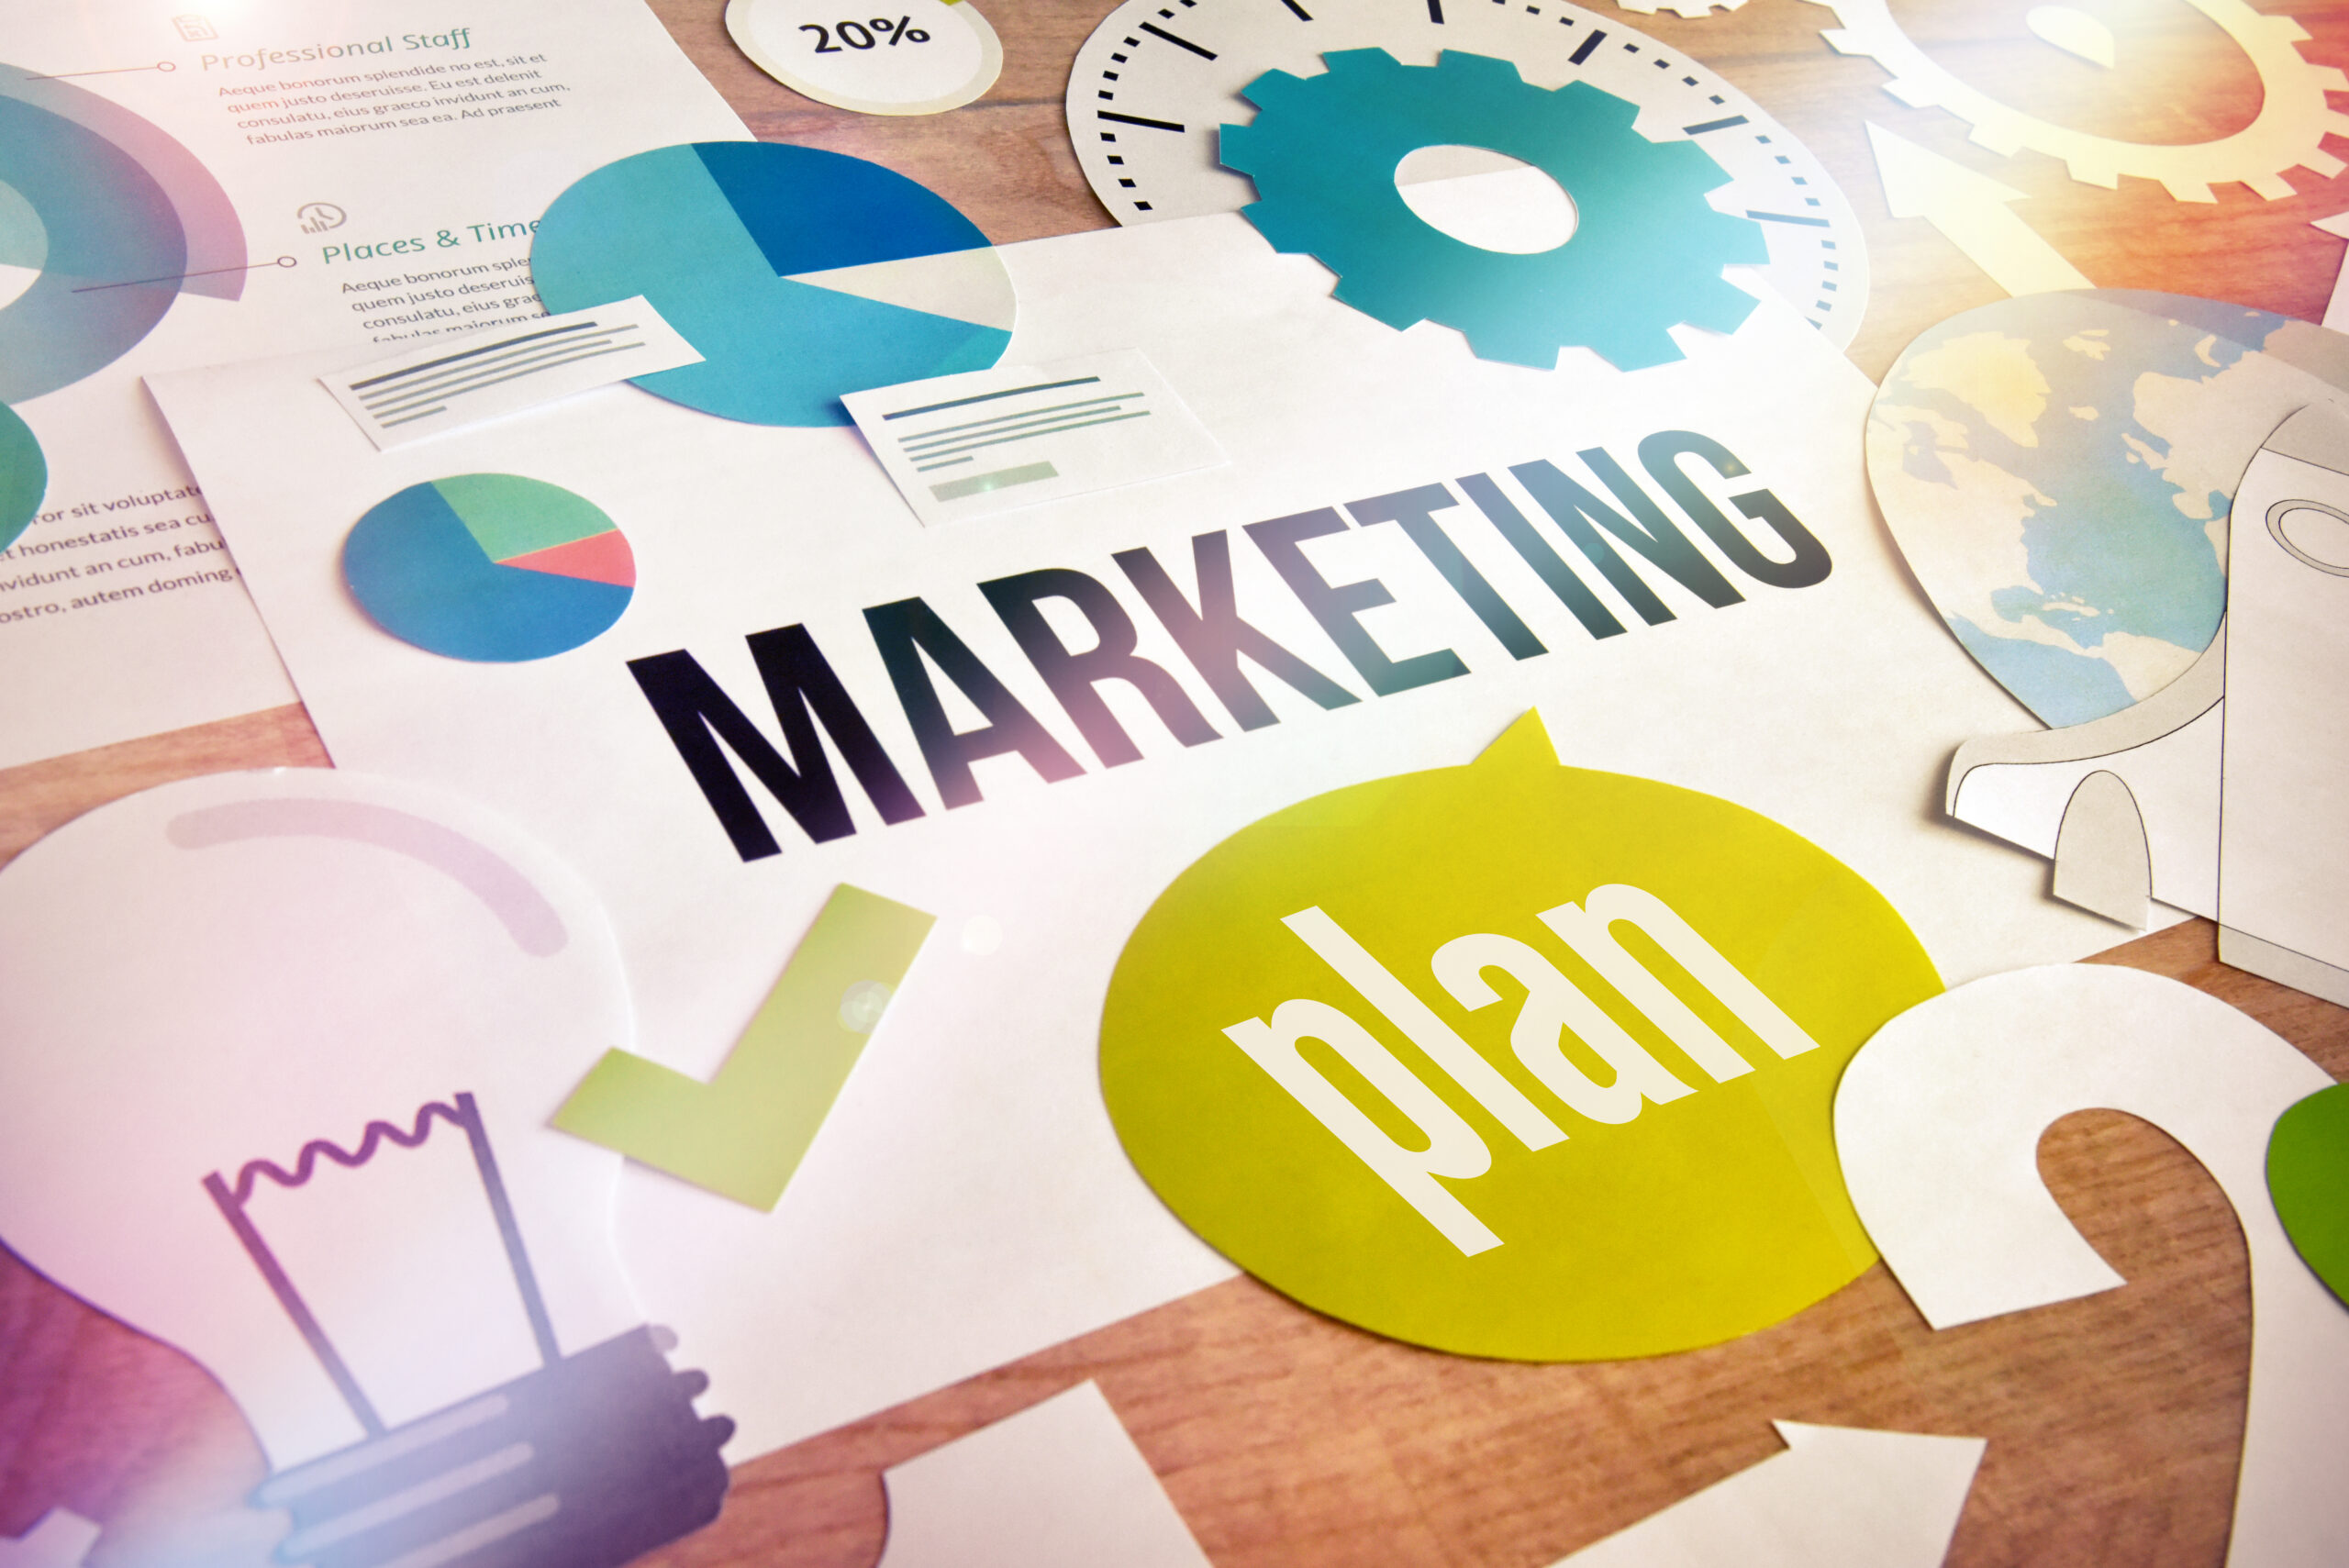 Image of a paper cutout showing the text "marketing plan"